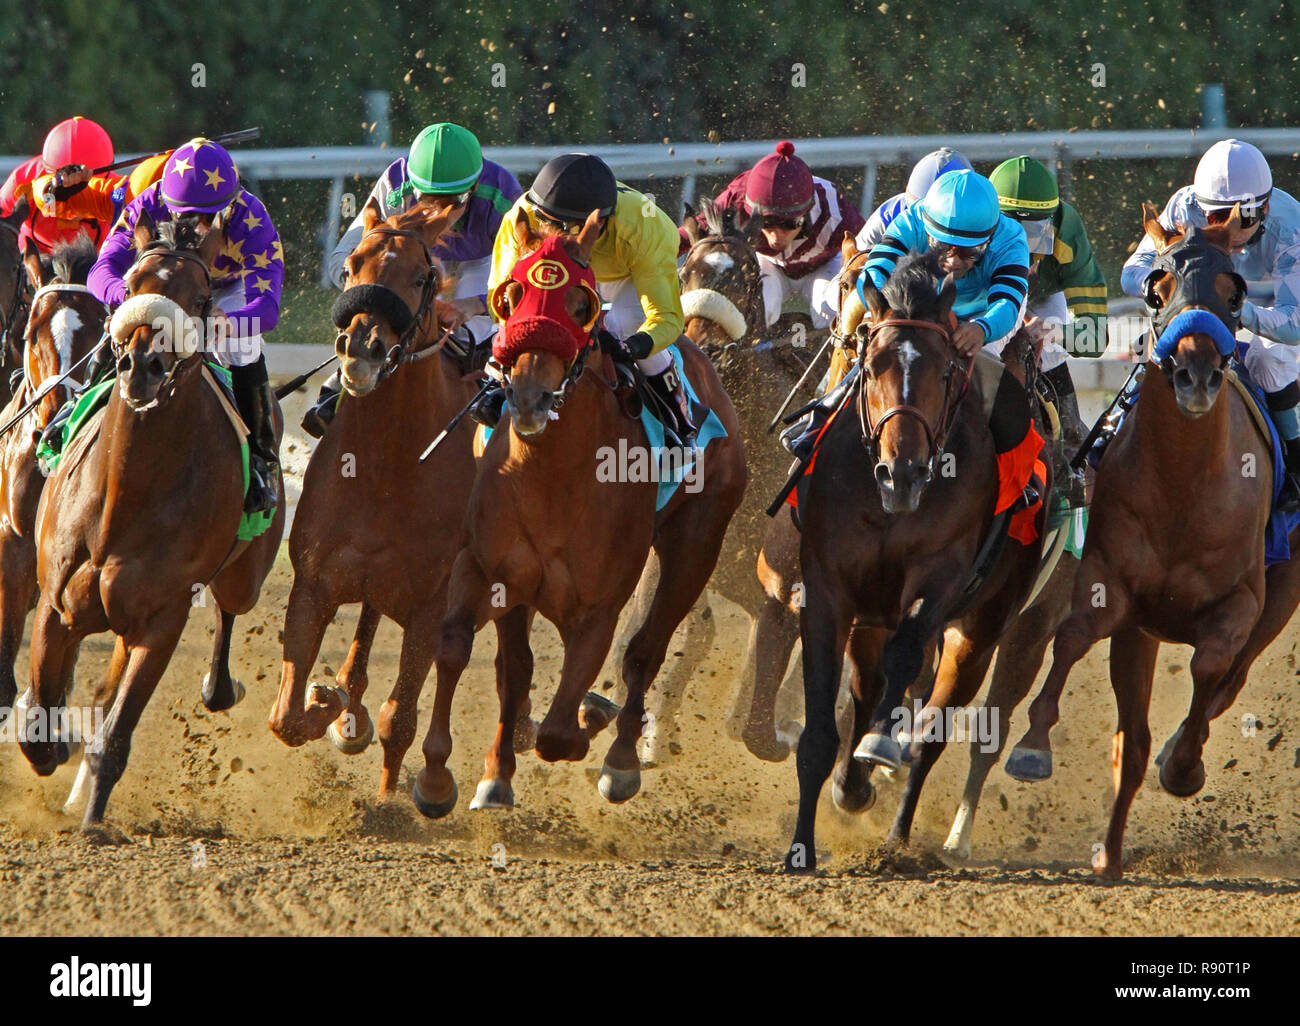 Thoroughbred horses and jockeys head down the homestretch in a dirt race. Head-on front view. Stock Photo